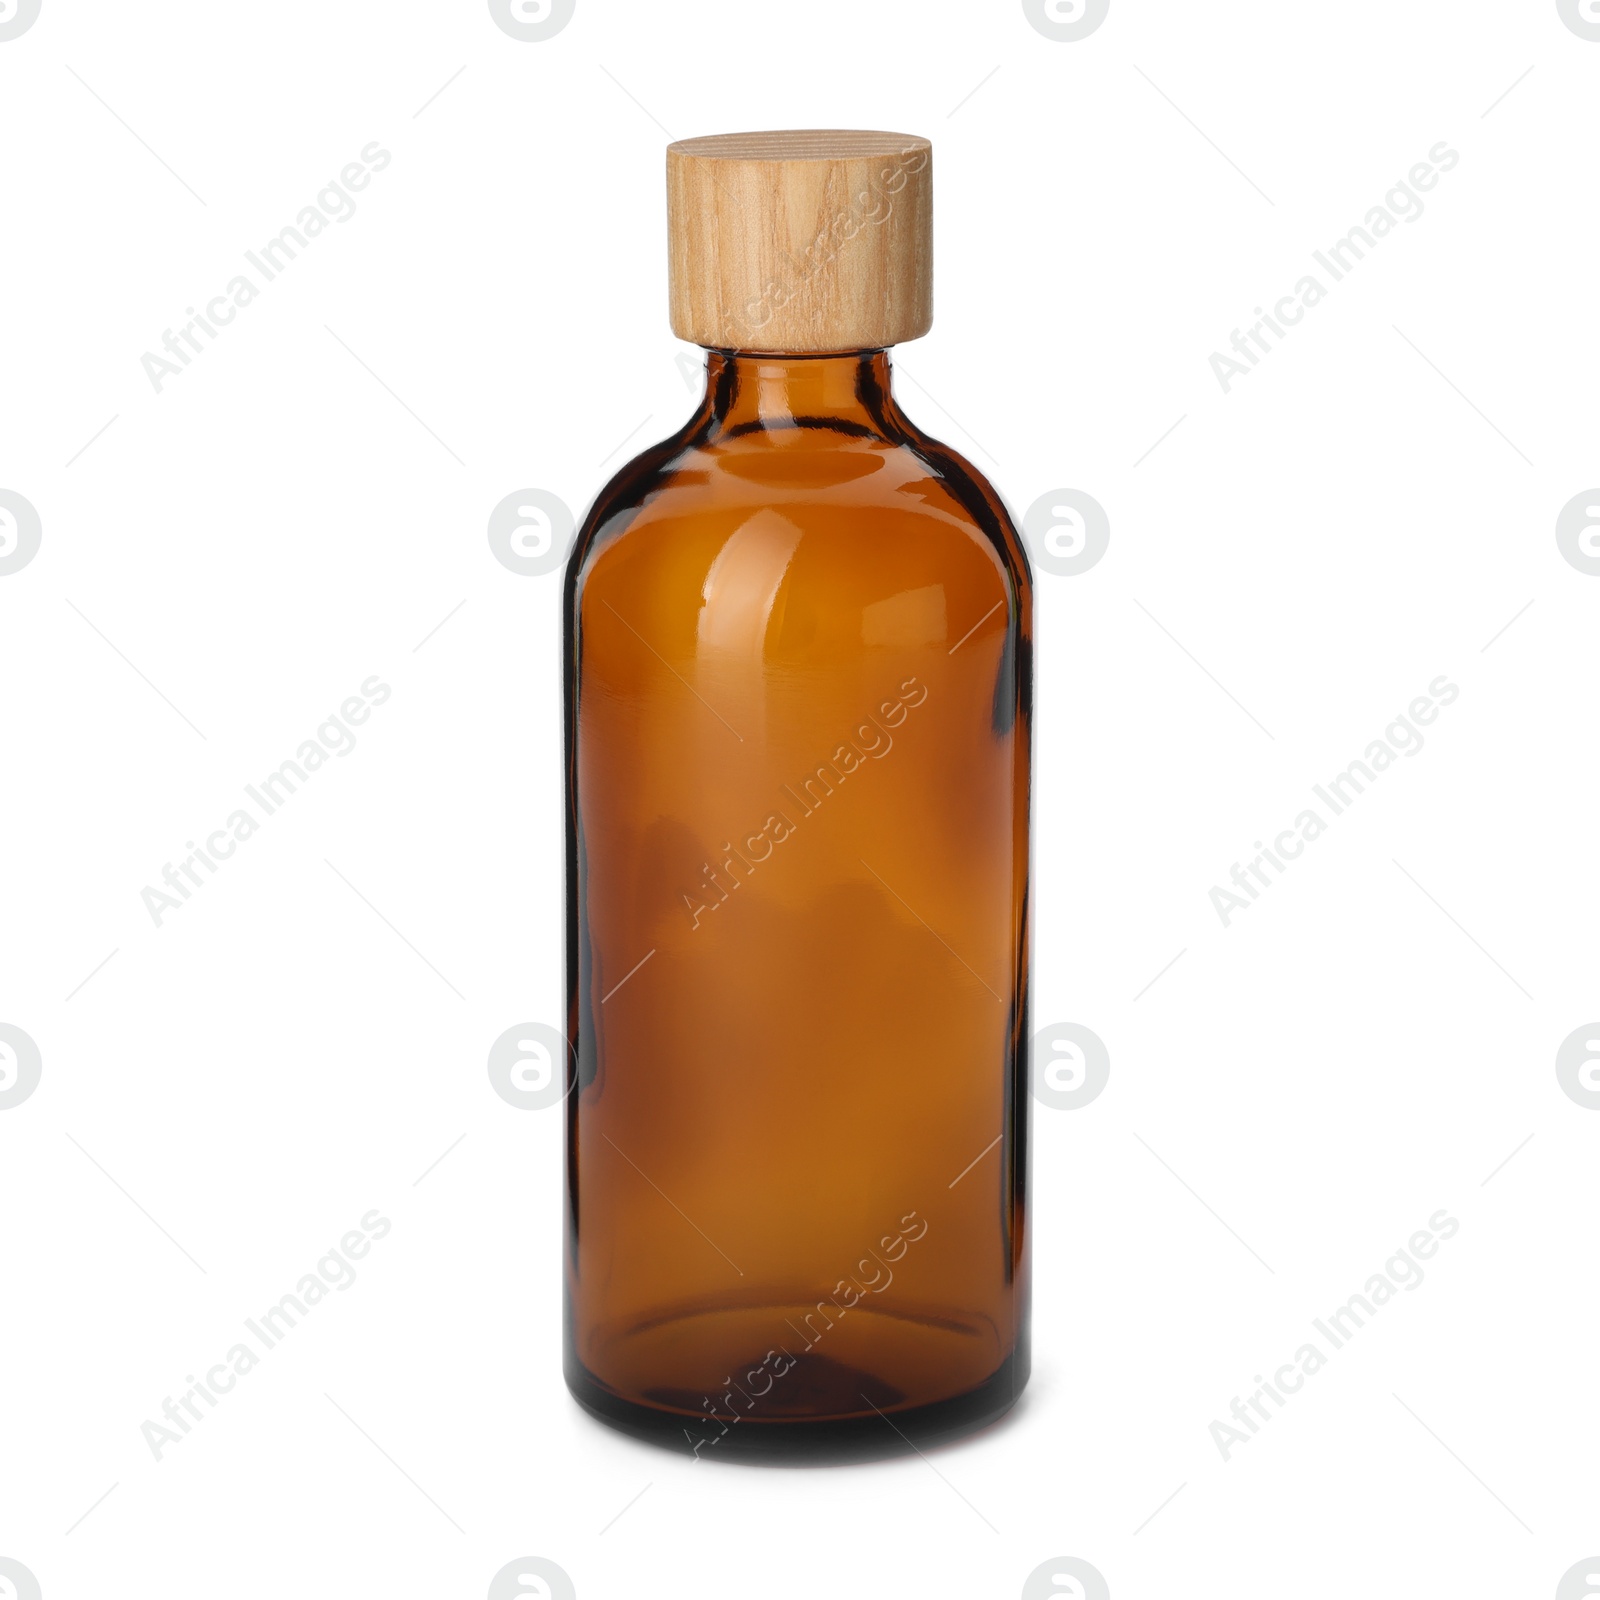 Photo of New empty glass bottle with wooden cap isolated on white